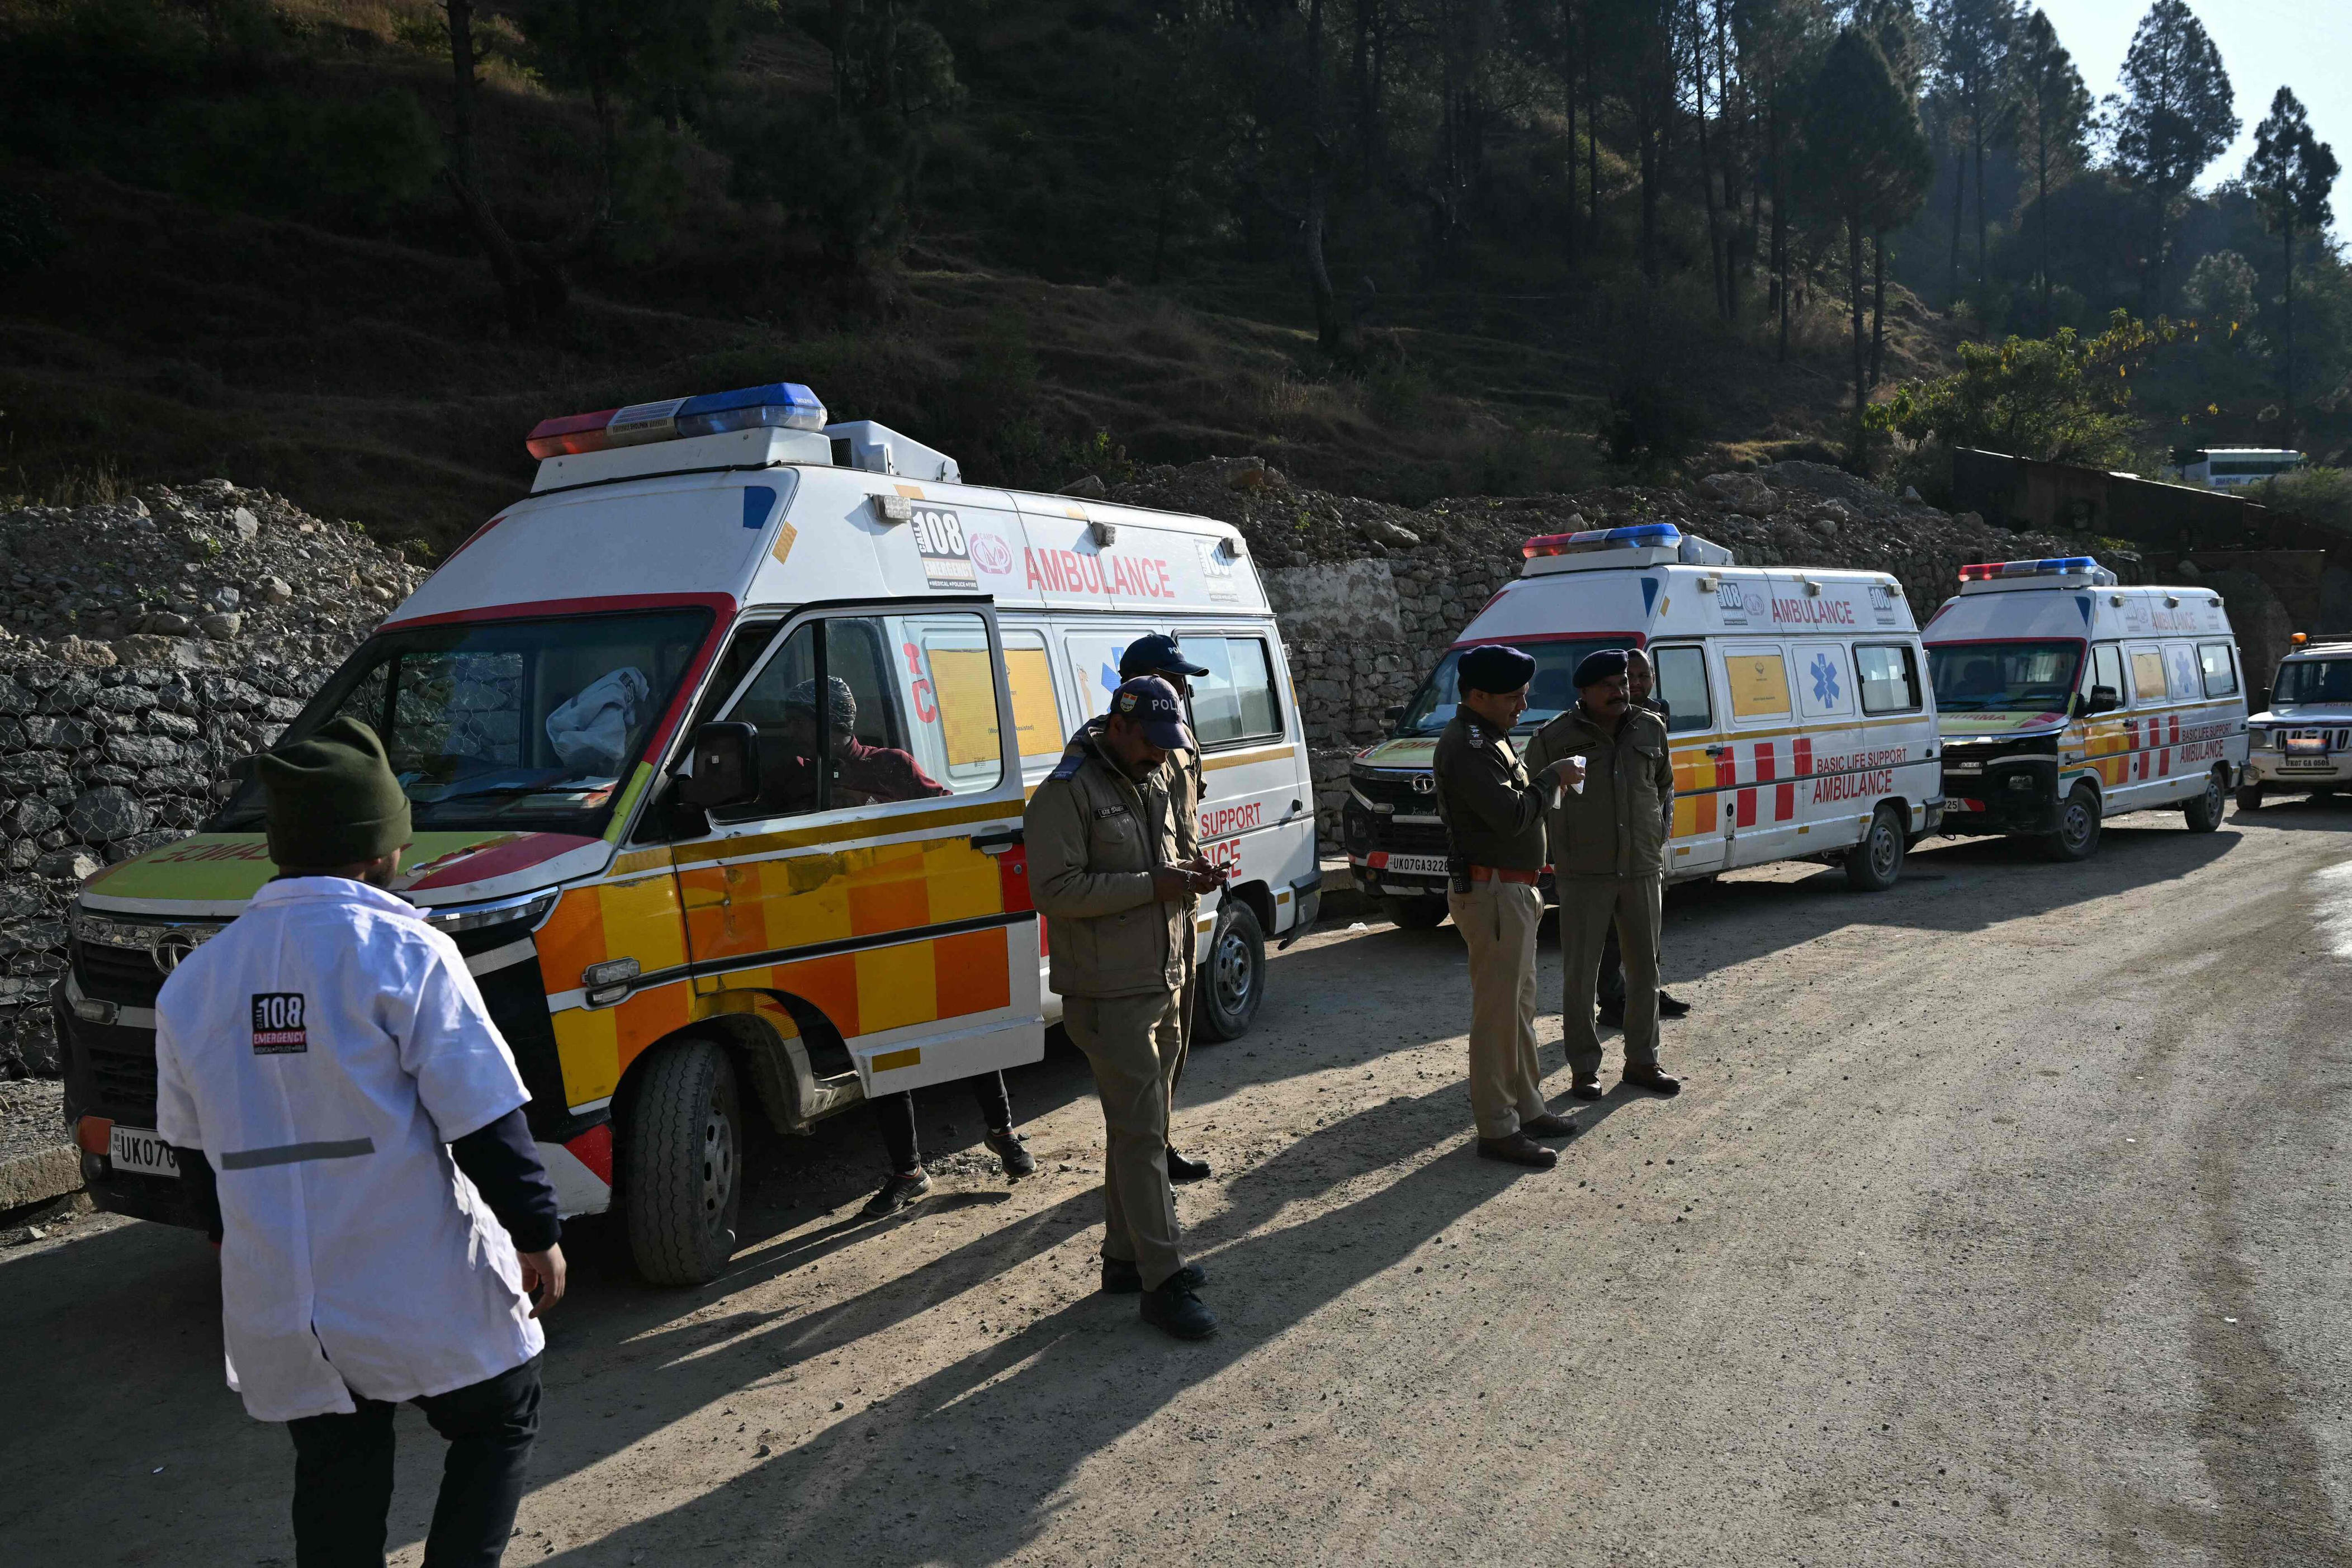 uttarakhand tunnel rescue enters last leg with 41 workers trapped